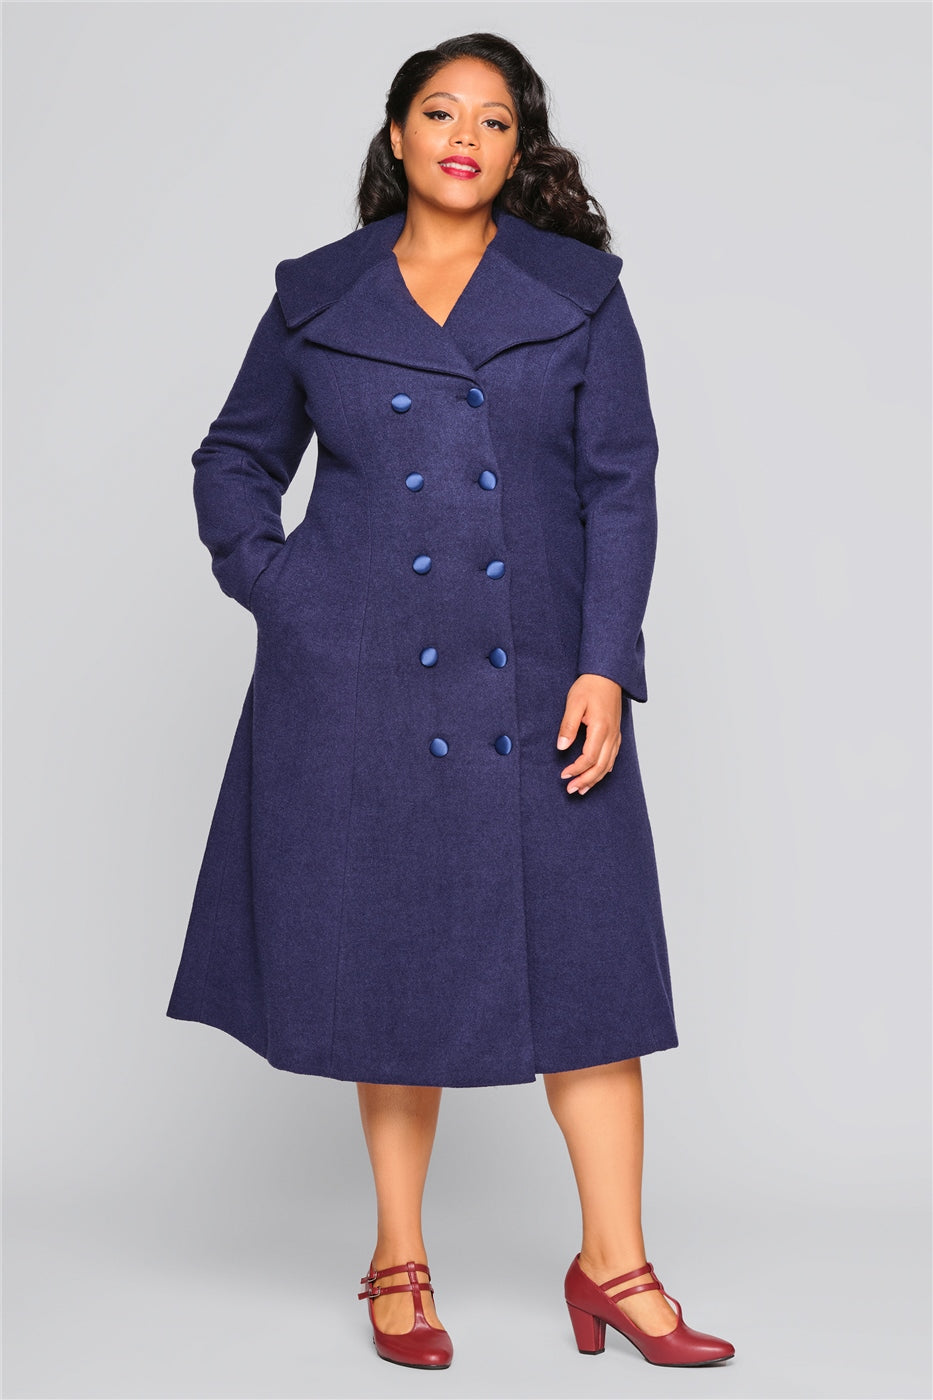 Eileean Coat in Black by Collectif